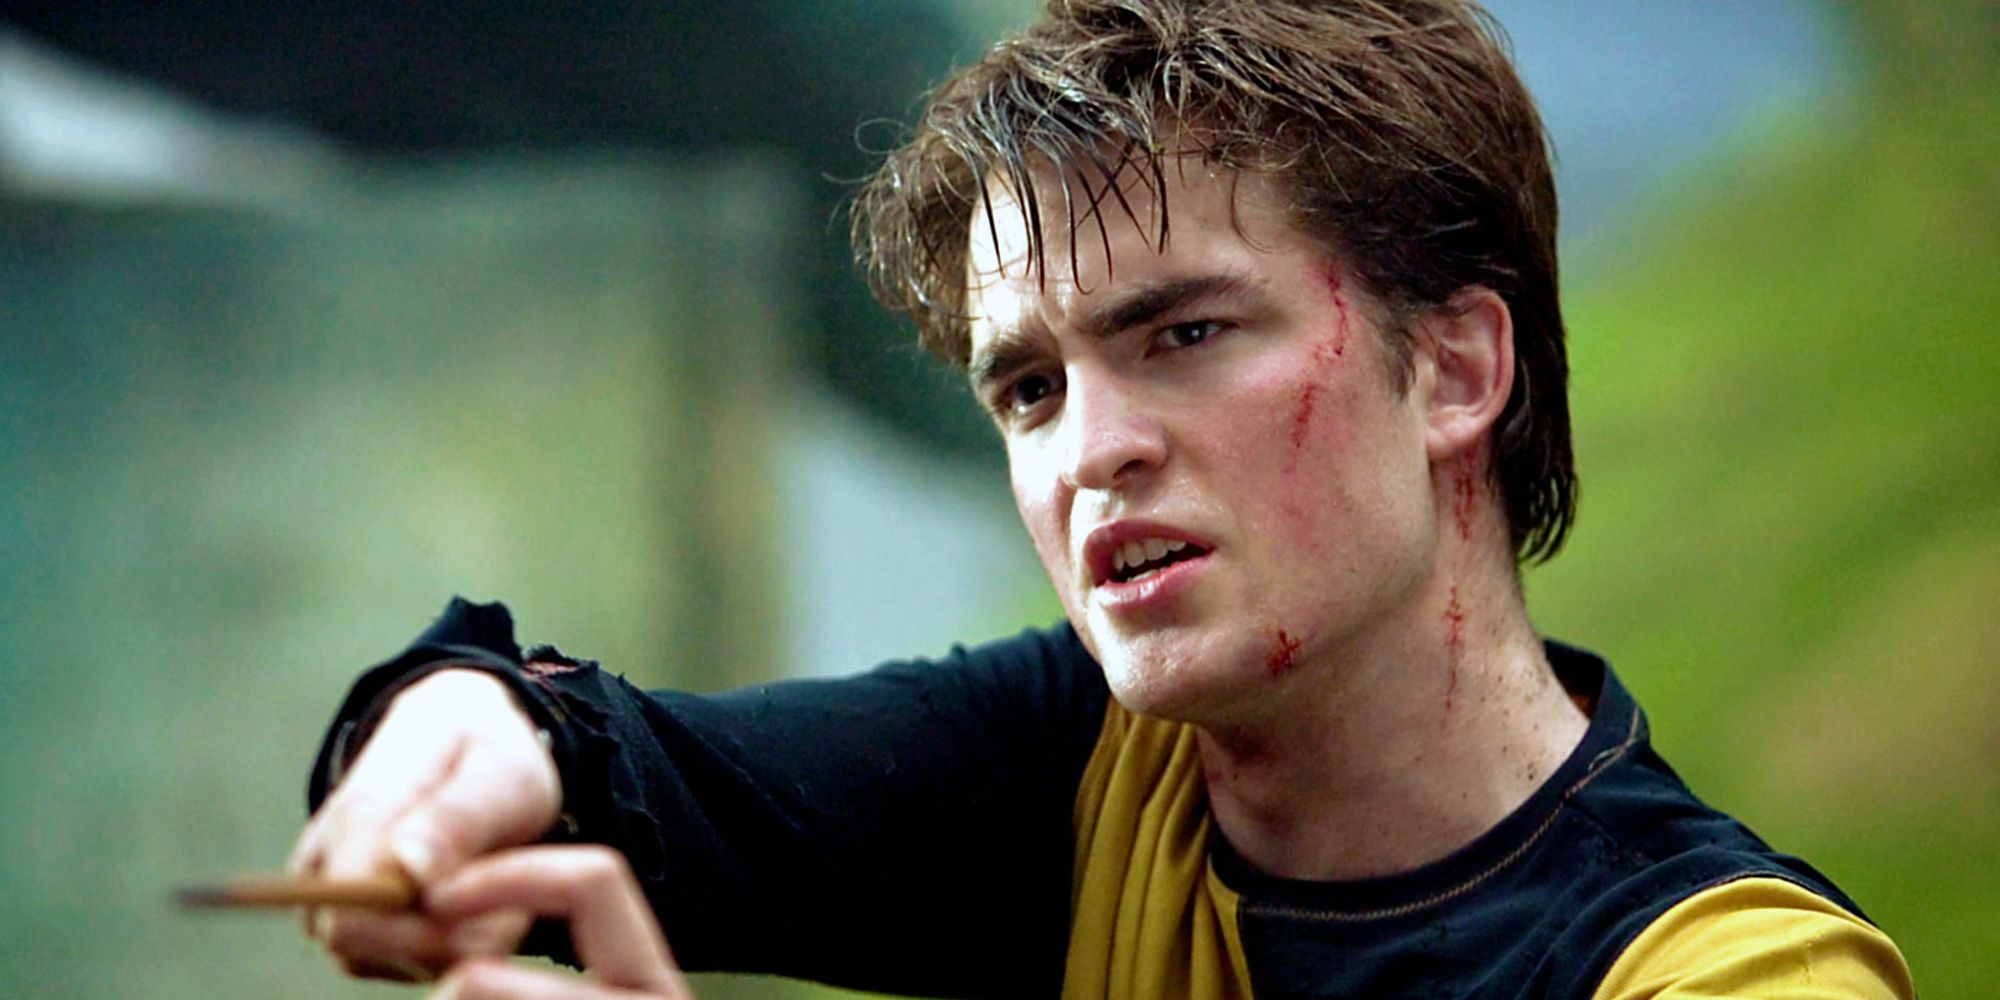 Robert Pattinson as Cedric Diggory In Harry Potter and the Goblet Of Fire Pointing Wand